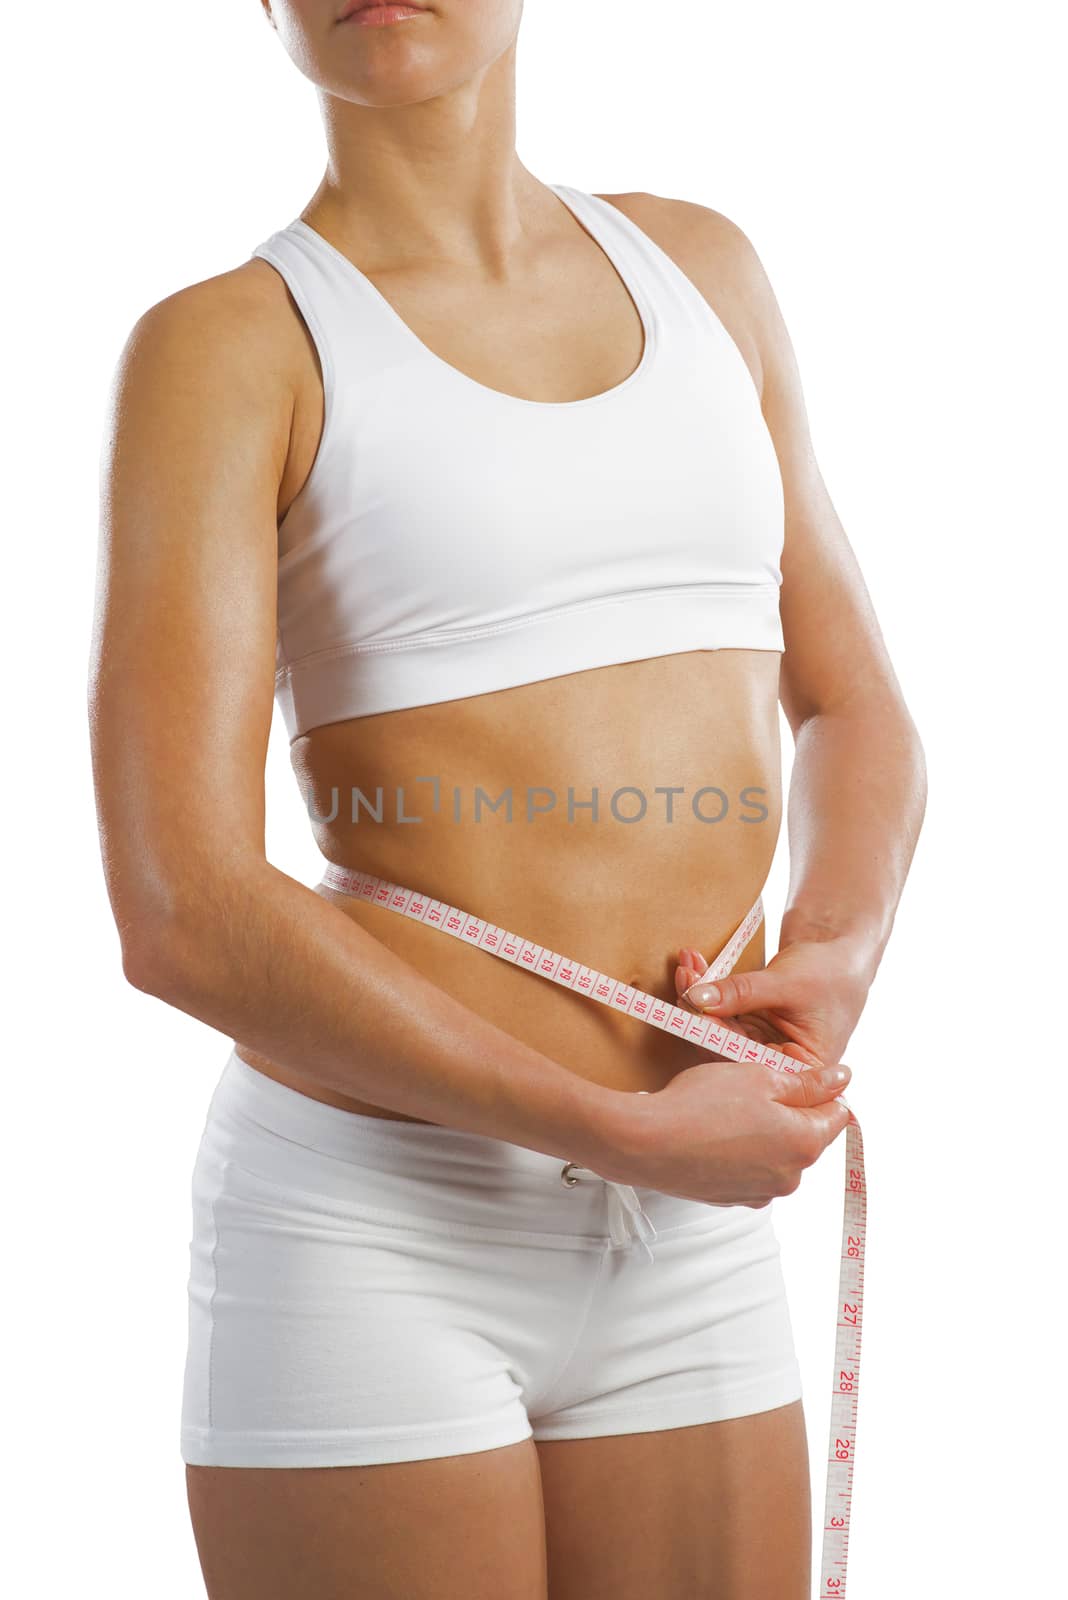 young athletic woman measuring waist by adam121